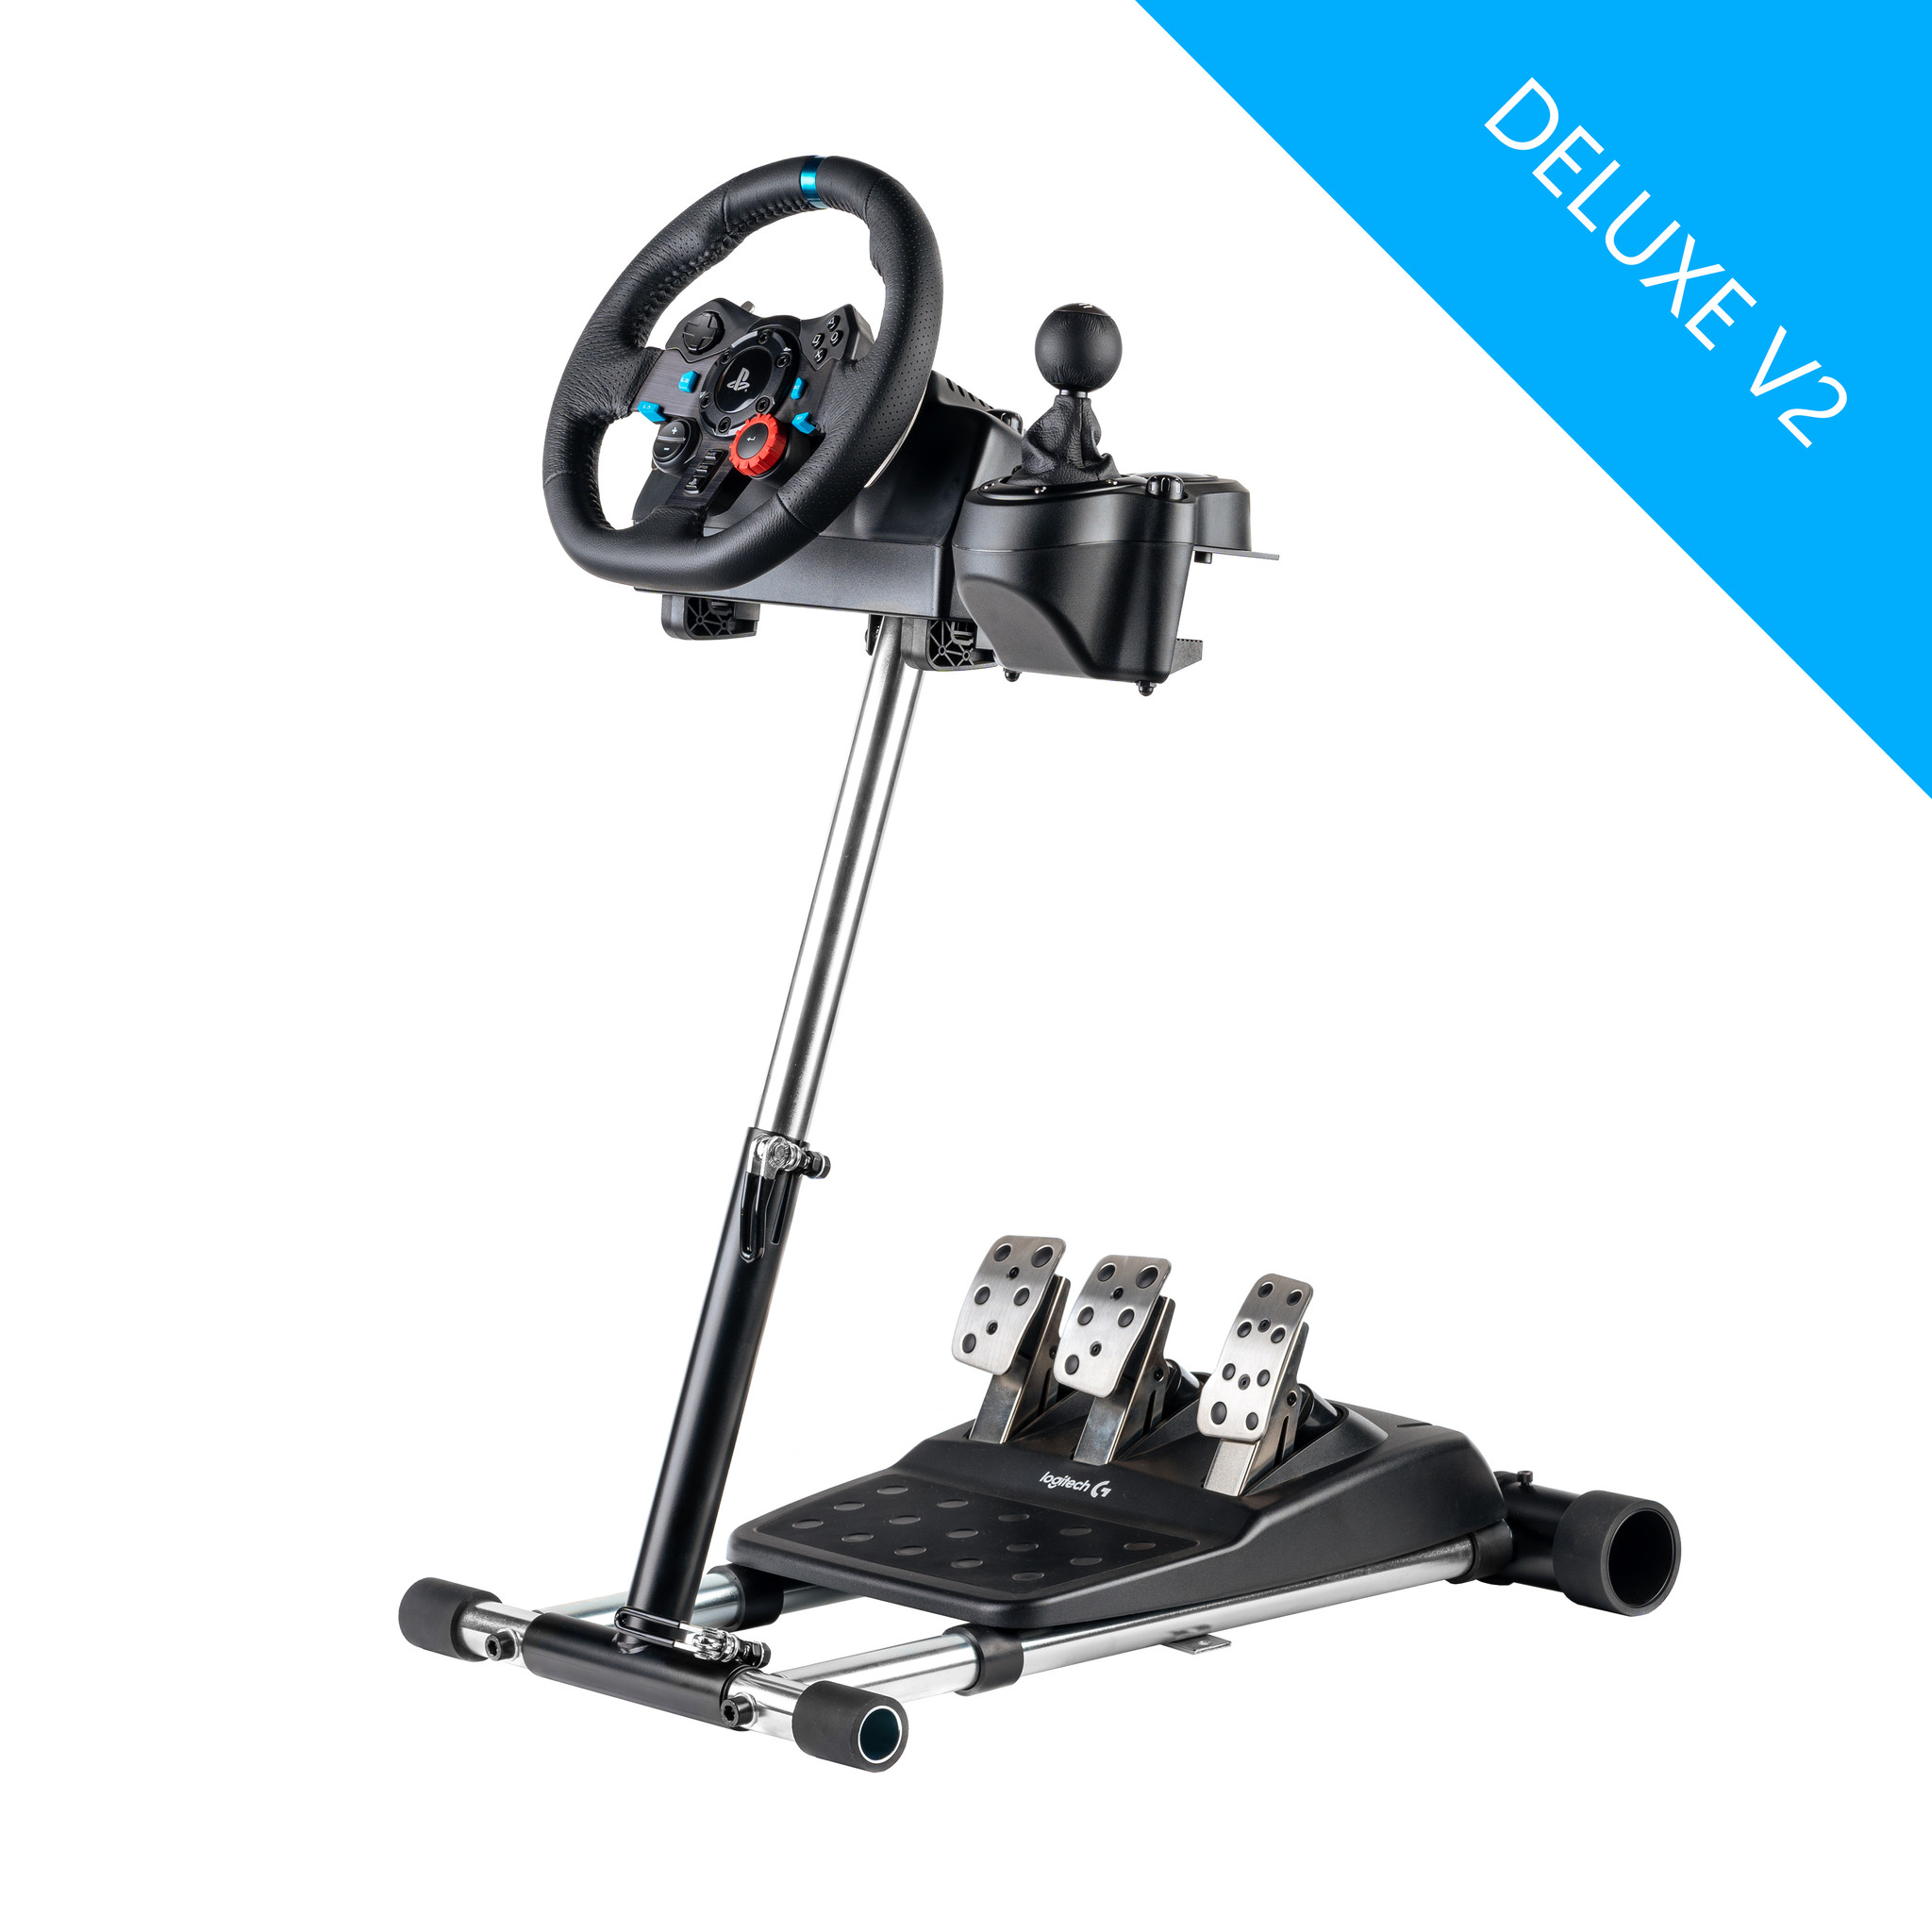 Wheel Stand Pro G Deluxe Wheel Stand Compatible With Logitech G29 G923 G920  G27 G25 wheels. Deluxe V2. Wheel and Pedals not included.